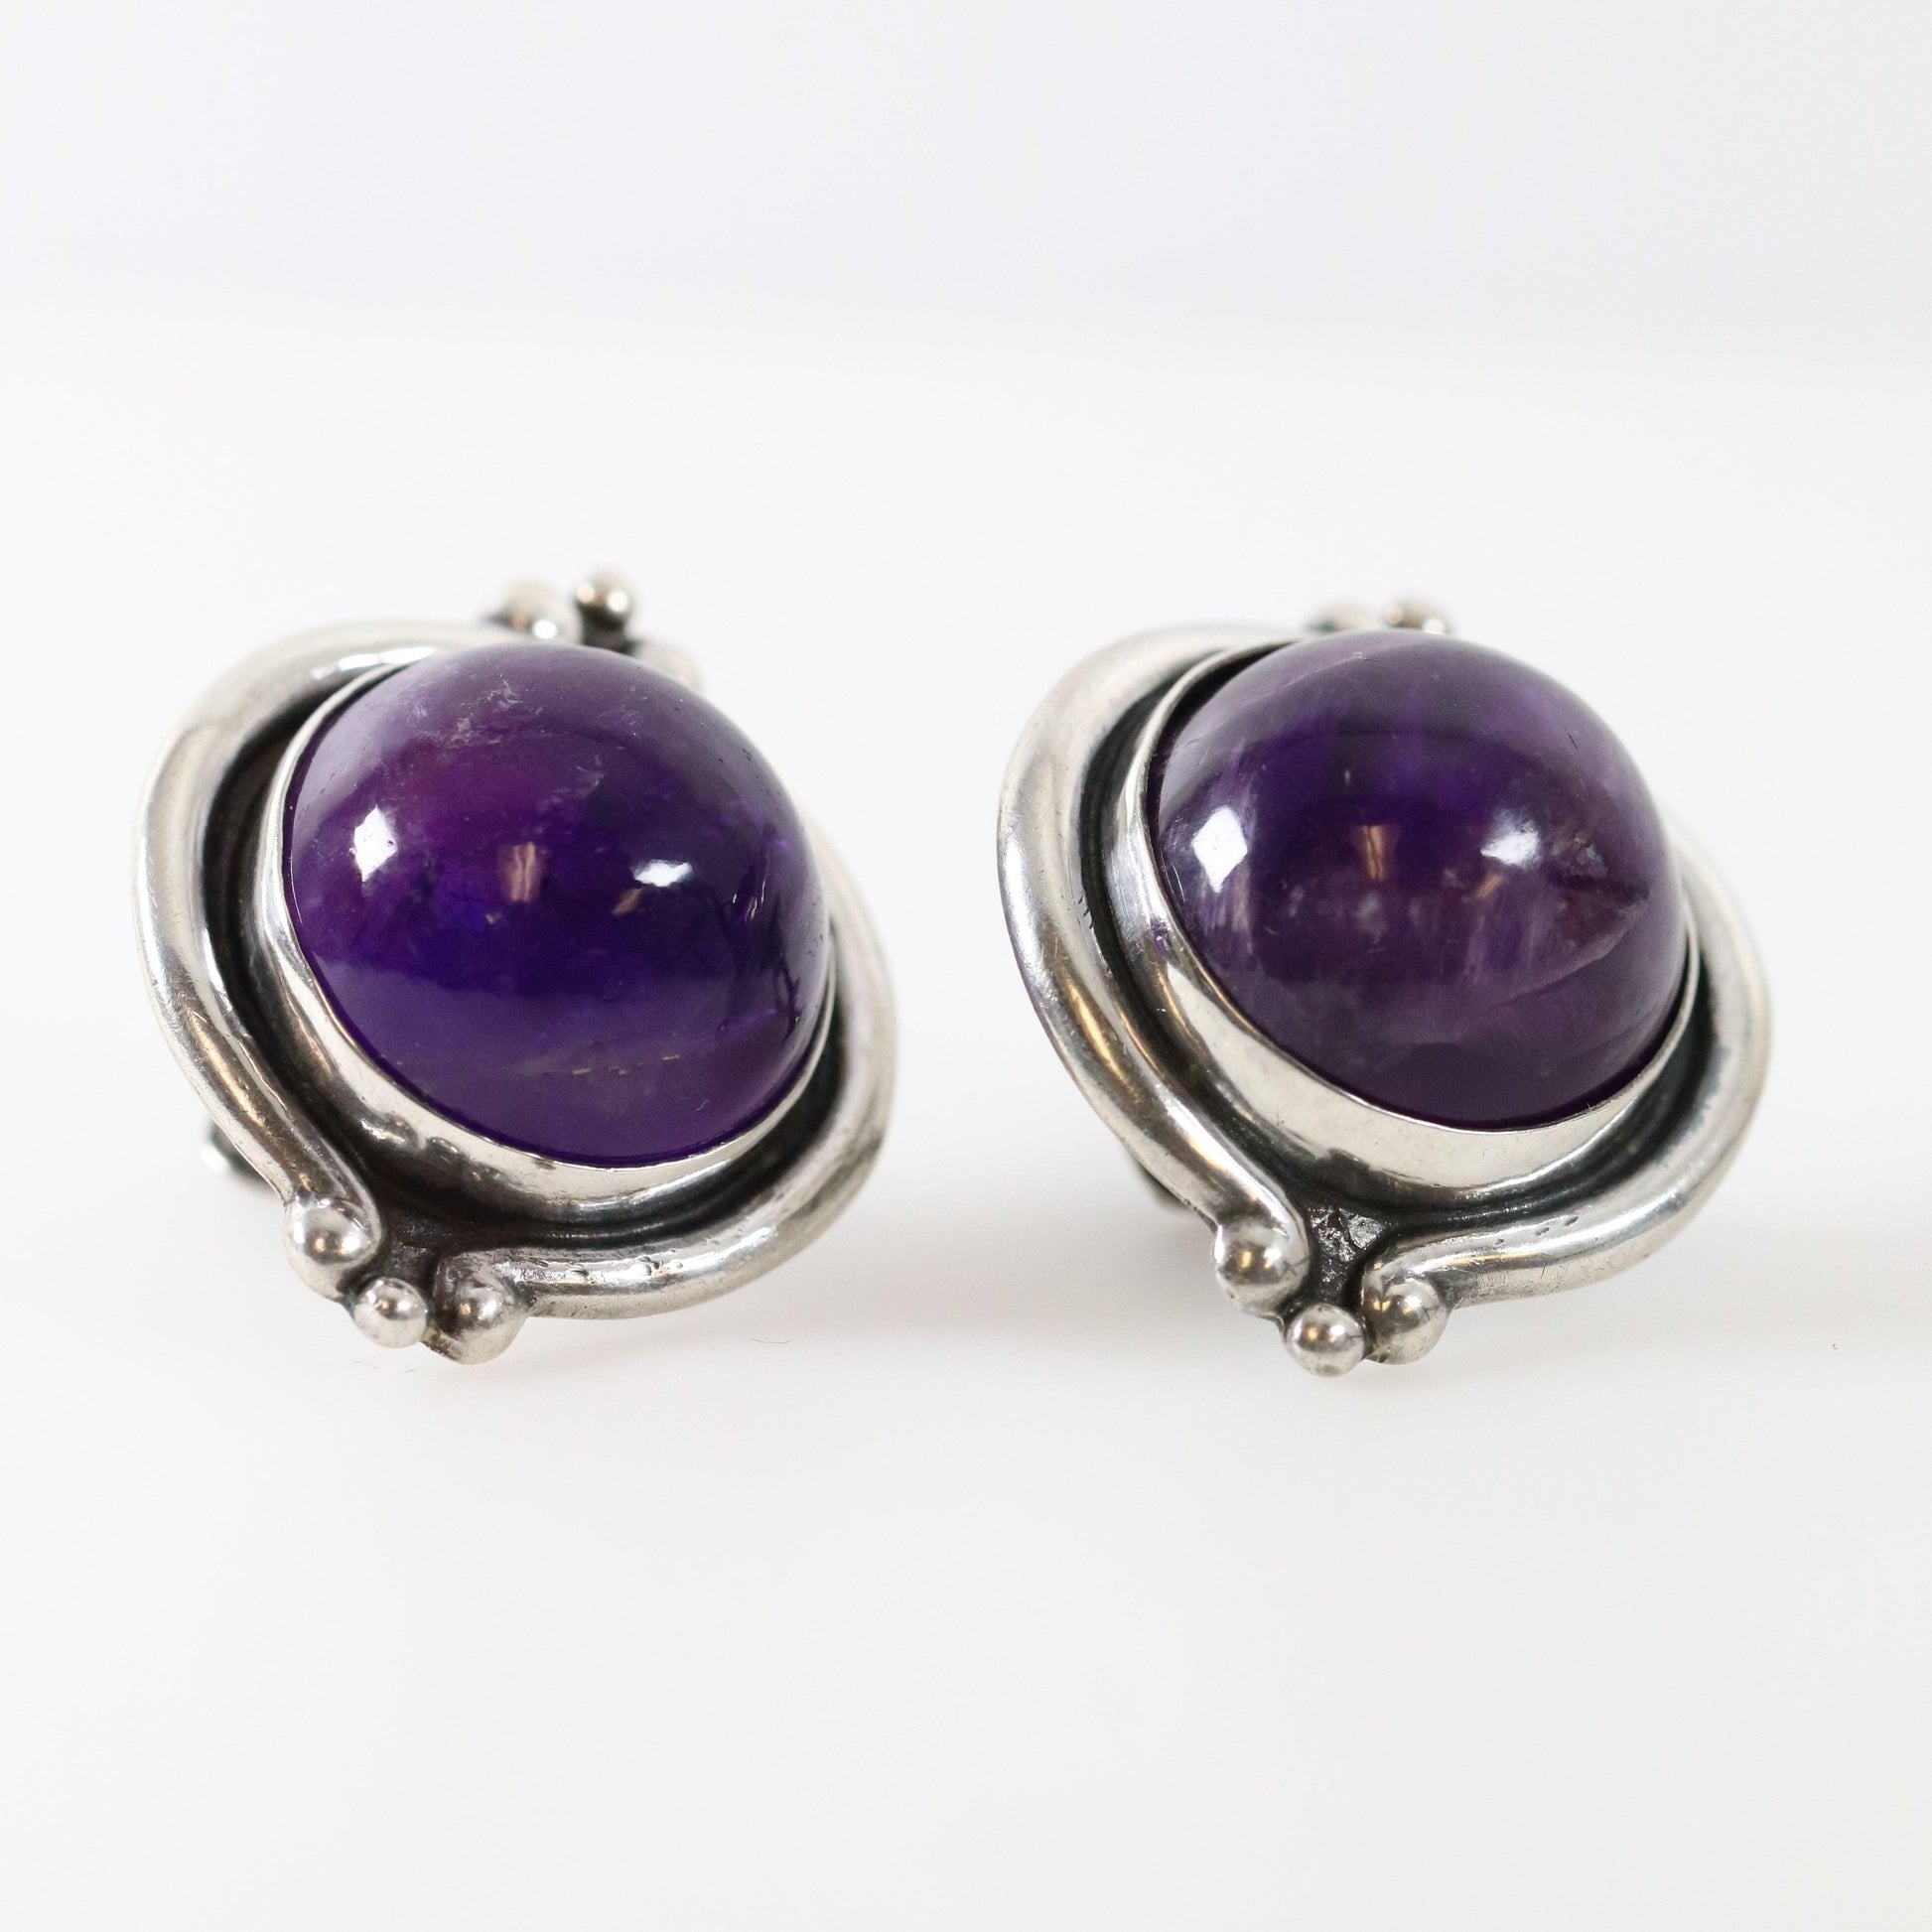 Vintage Los Castillo Taxco Silver Mexican Jewelry | Large Mid Century Amethyst and Silver Earrings - Carmel Fine Silver Jewelry